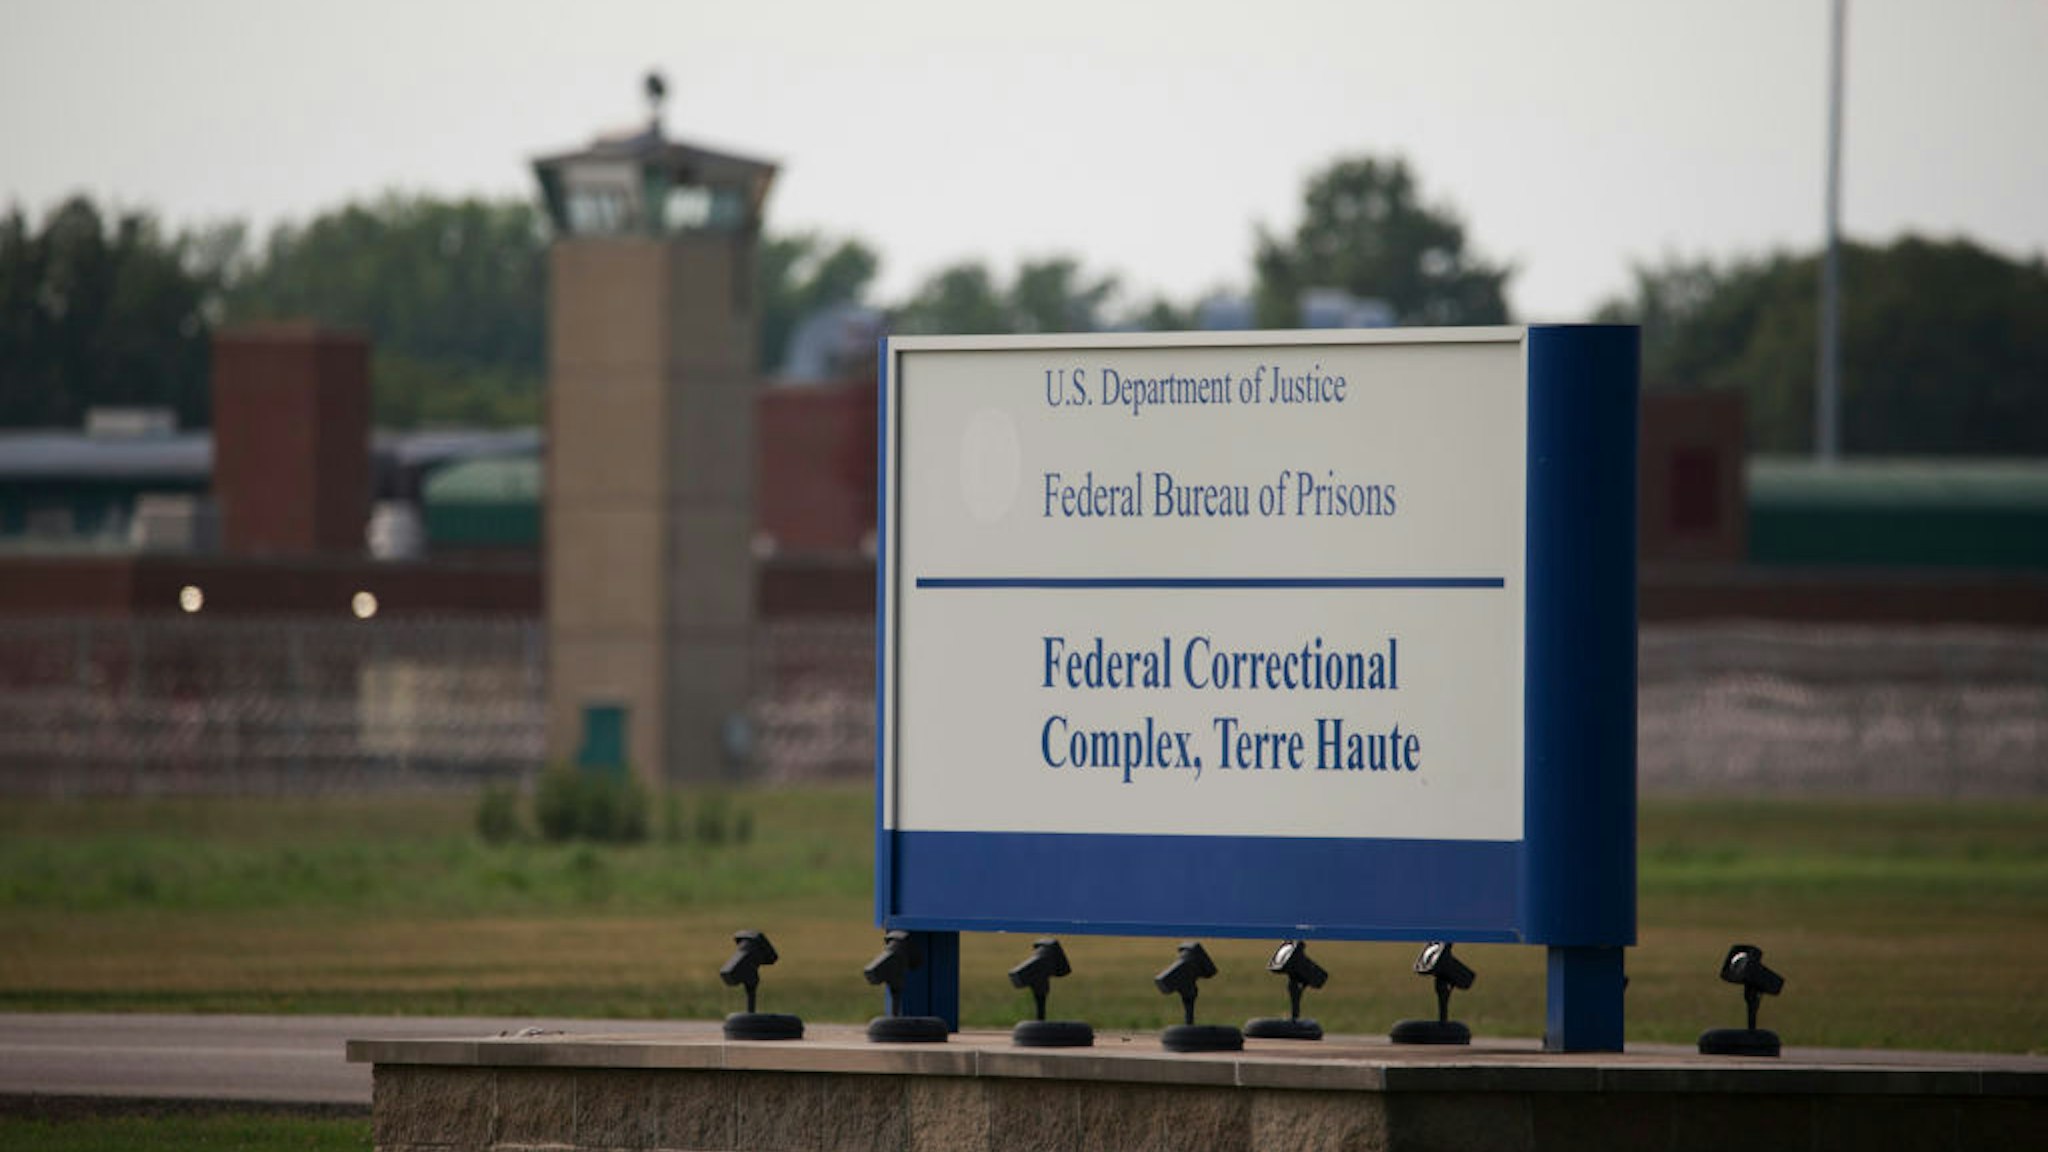 TERRE HAUTE, INDIANA, UNITED STATES - 2020/07/15: View of a sign outside the Terre Haute Federal Correctional Complex where death row inmate Wesley Ira Purkey was scheduled to be executed by lethal injection. Purkey's execution scheduled for 7 p.m., was delayed by a judge. Purkey suffers from Dementia, and Alzheimer's disease. Wesley Ira Purkey was convicted of a gruesome 1998 kidnapping and killing.